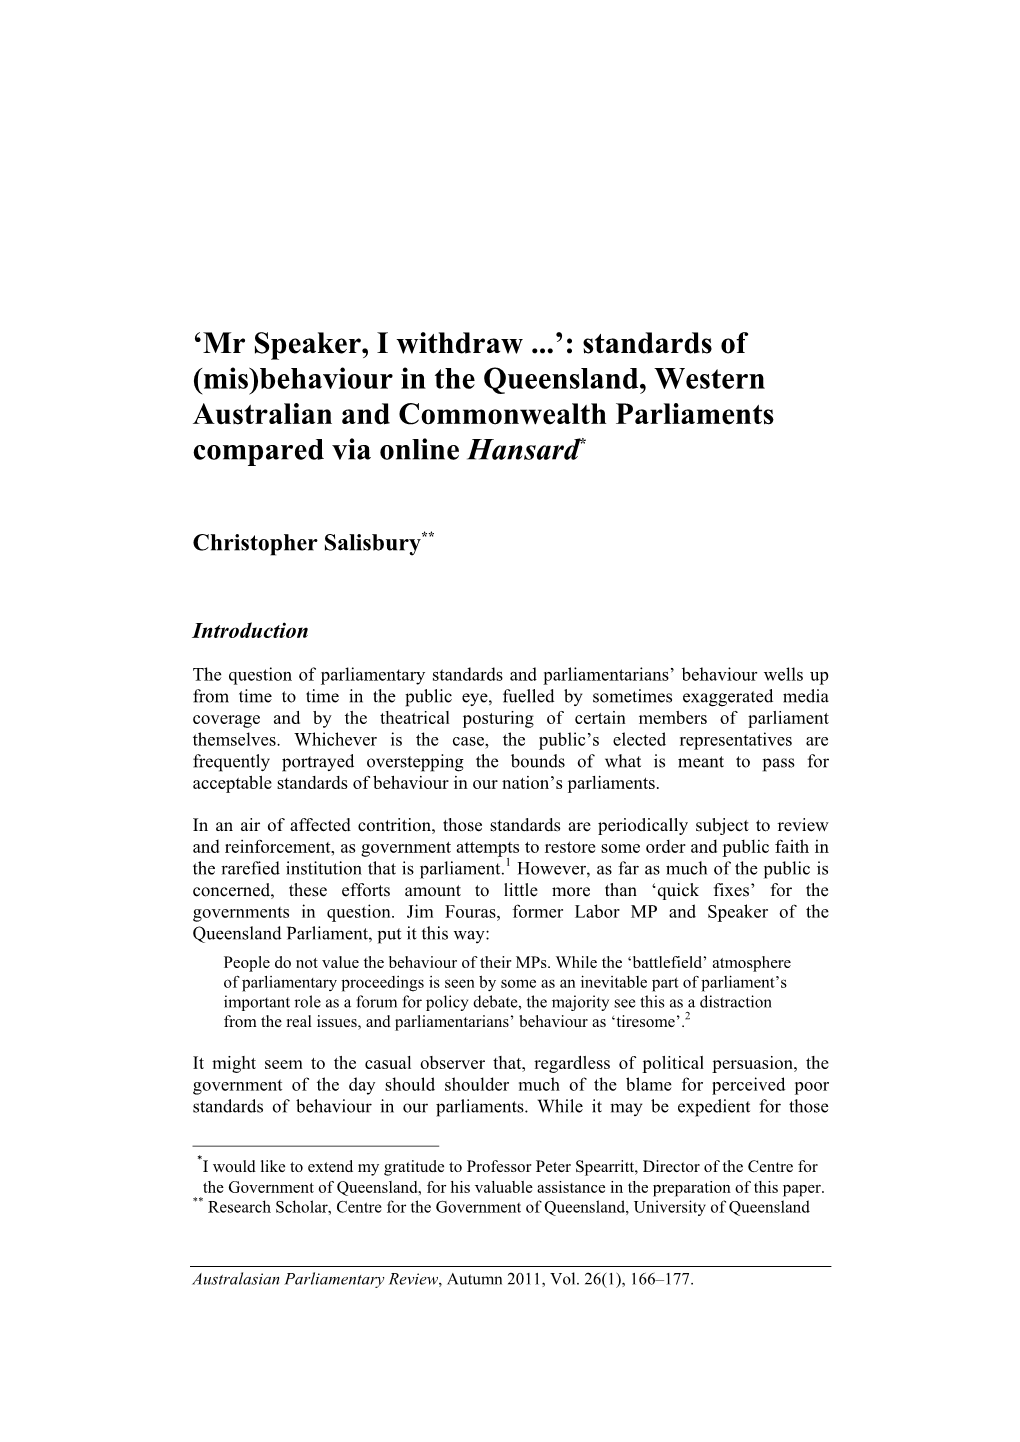 Mr Speaker, I Withdraw ...’: Standards of (Mis)Behaviour in the Queensland, Western Australian and Commonwealth Parliaments Compared Via Online Hansard*